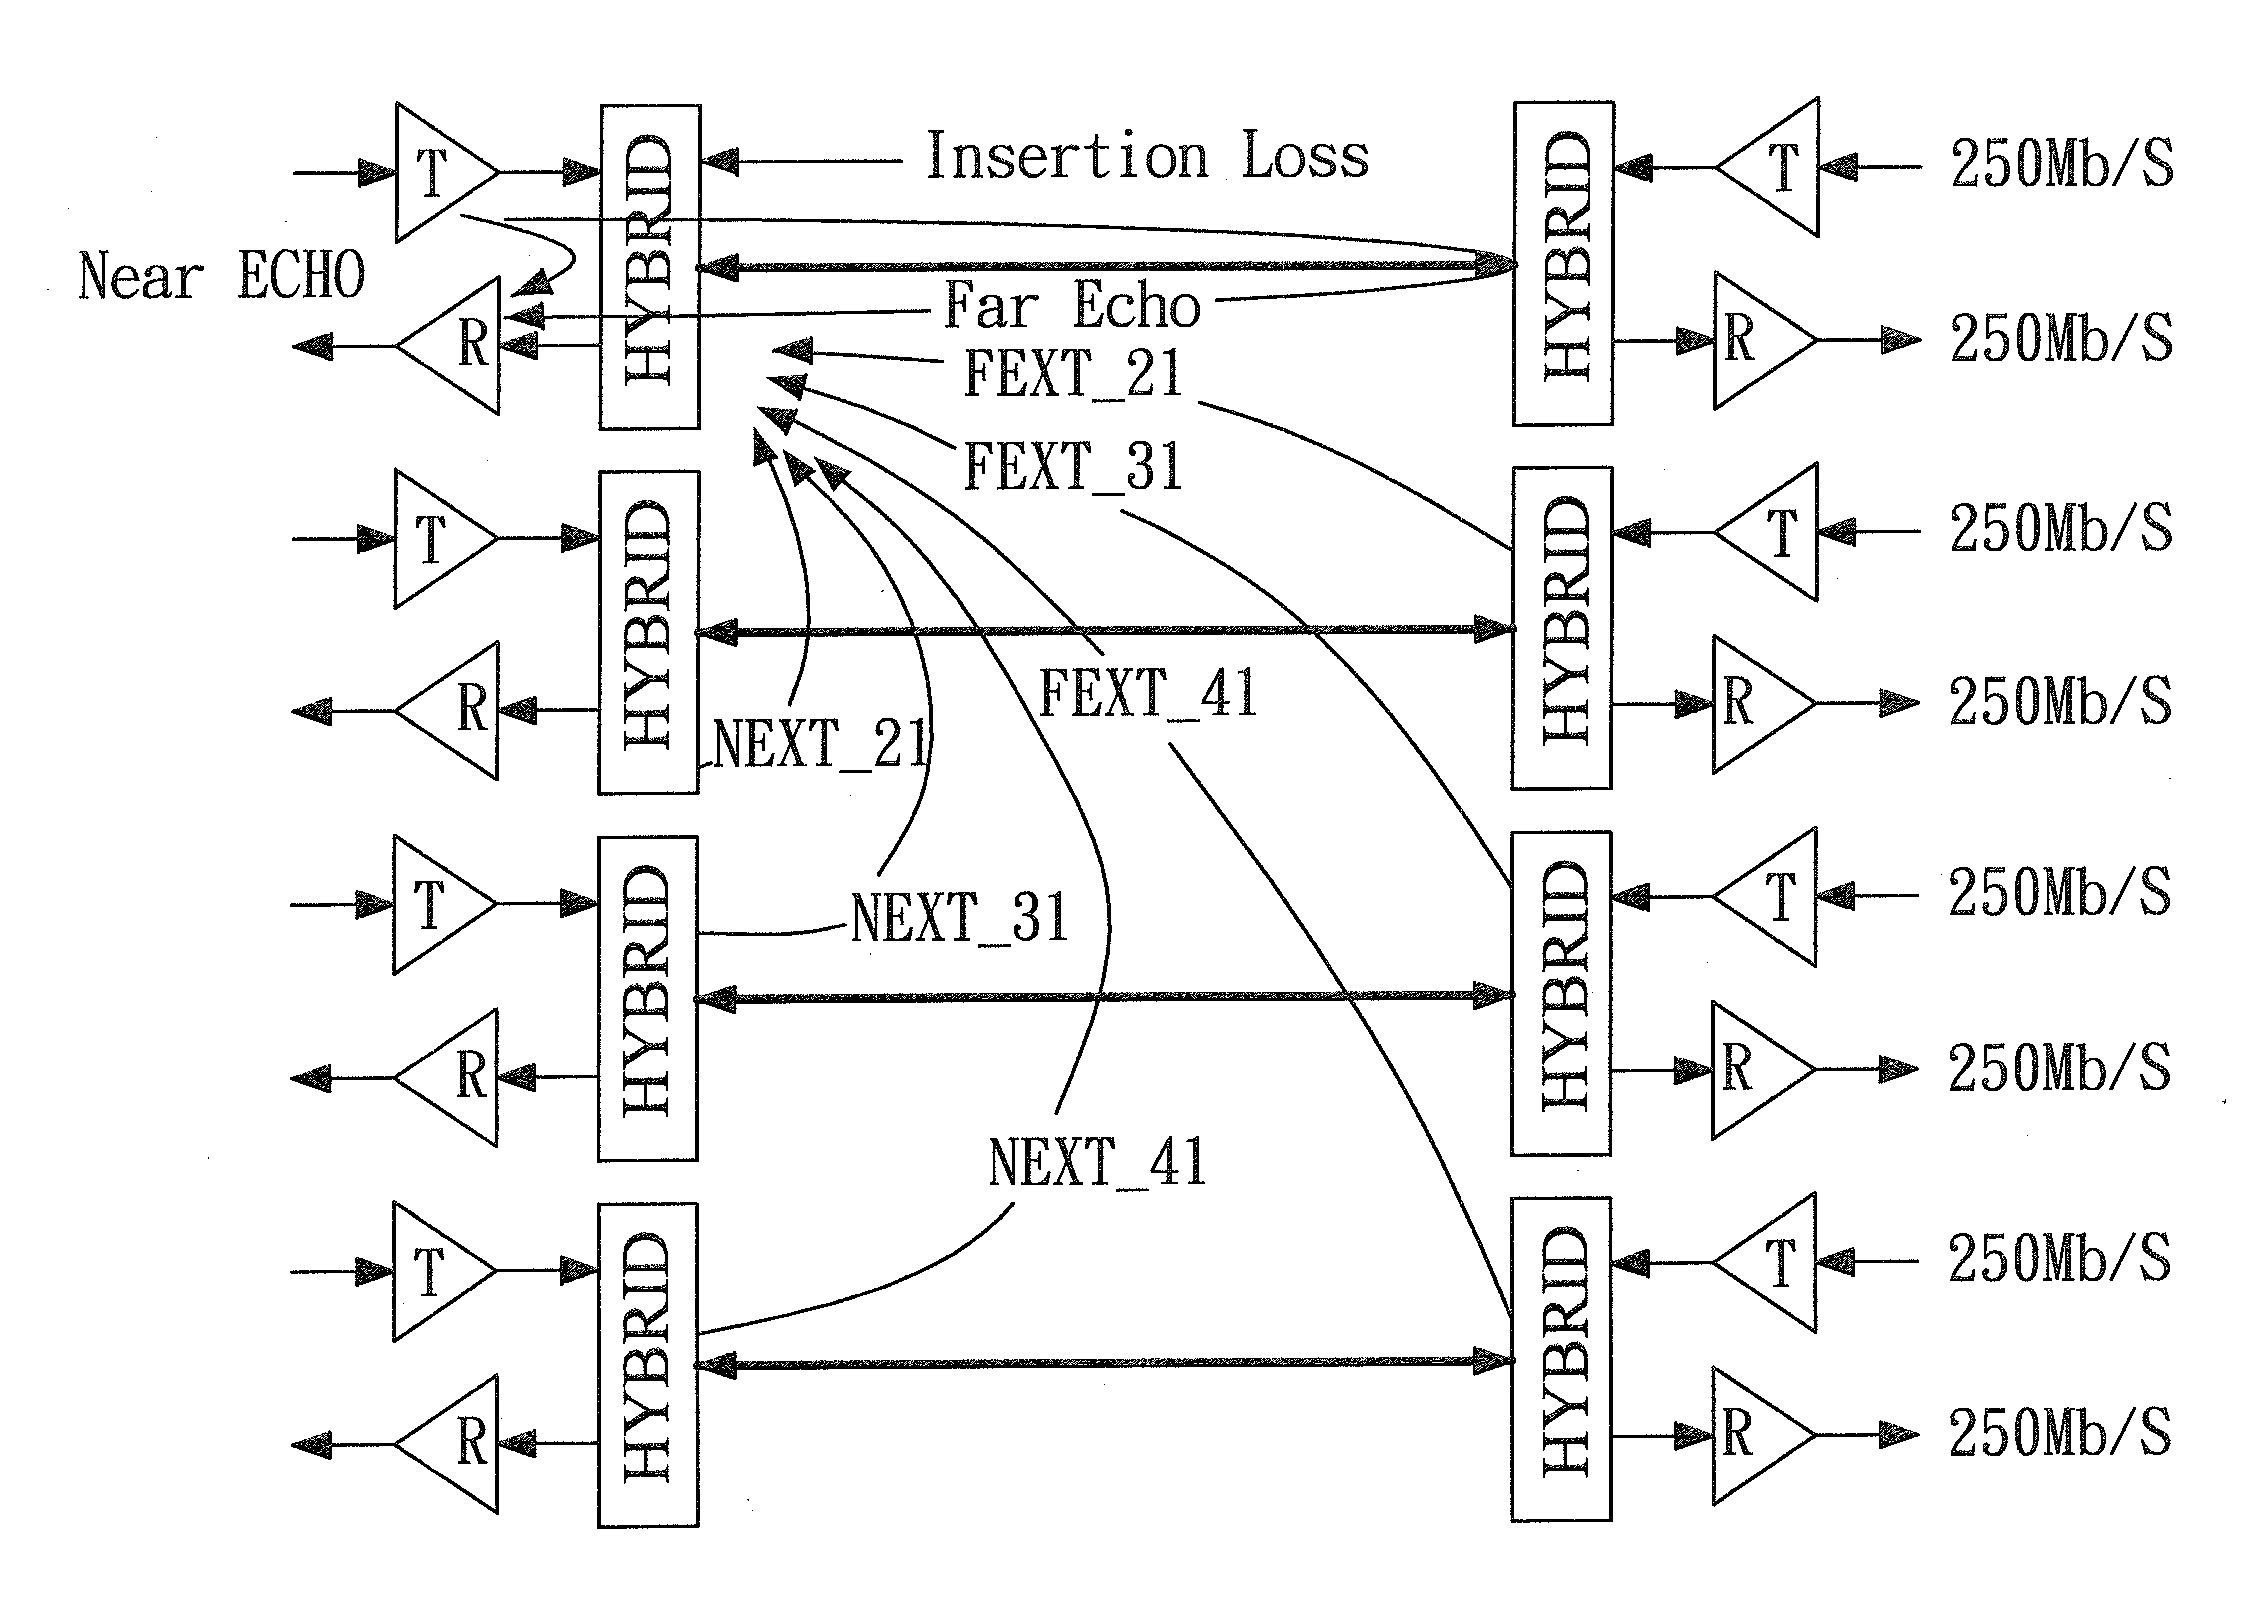 Adaptive ethernet transceiver with joint decision feedback equalizer and trellis decoder